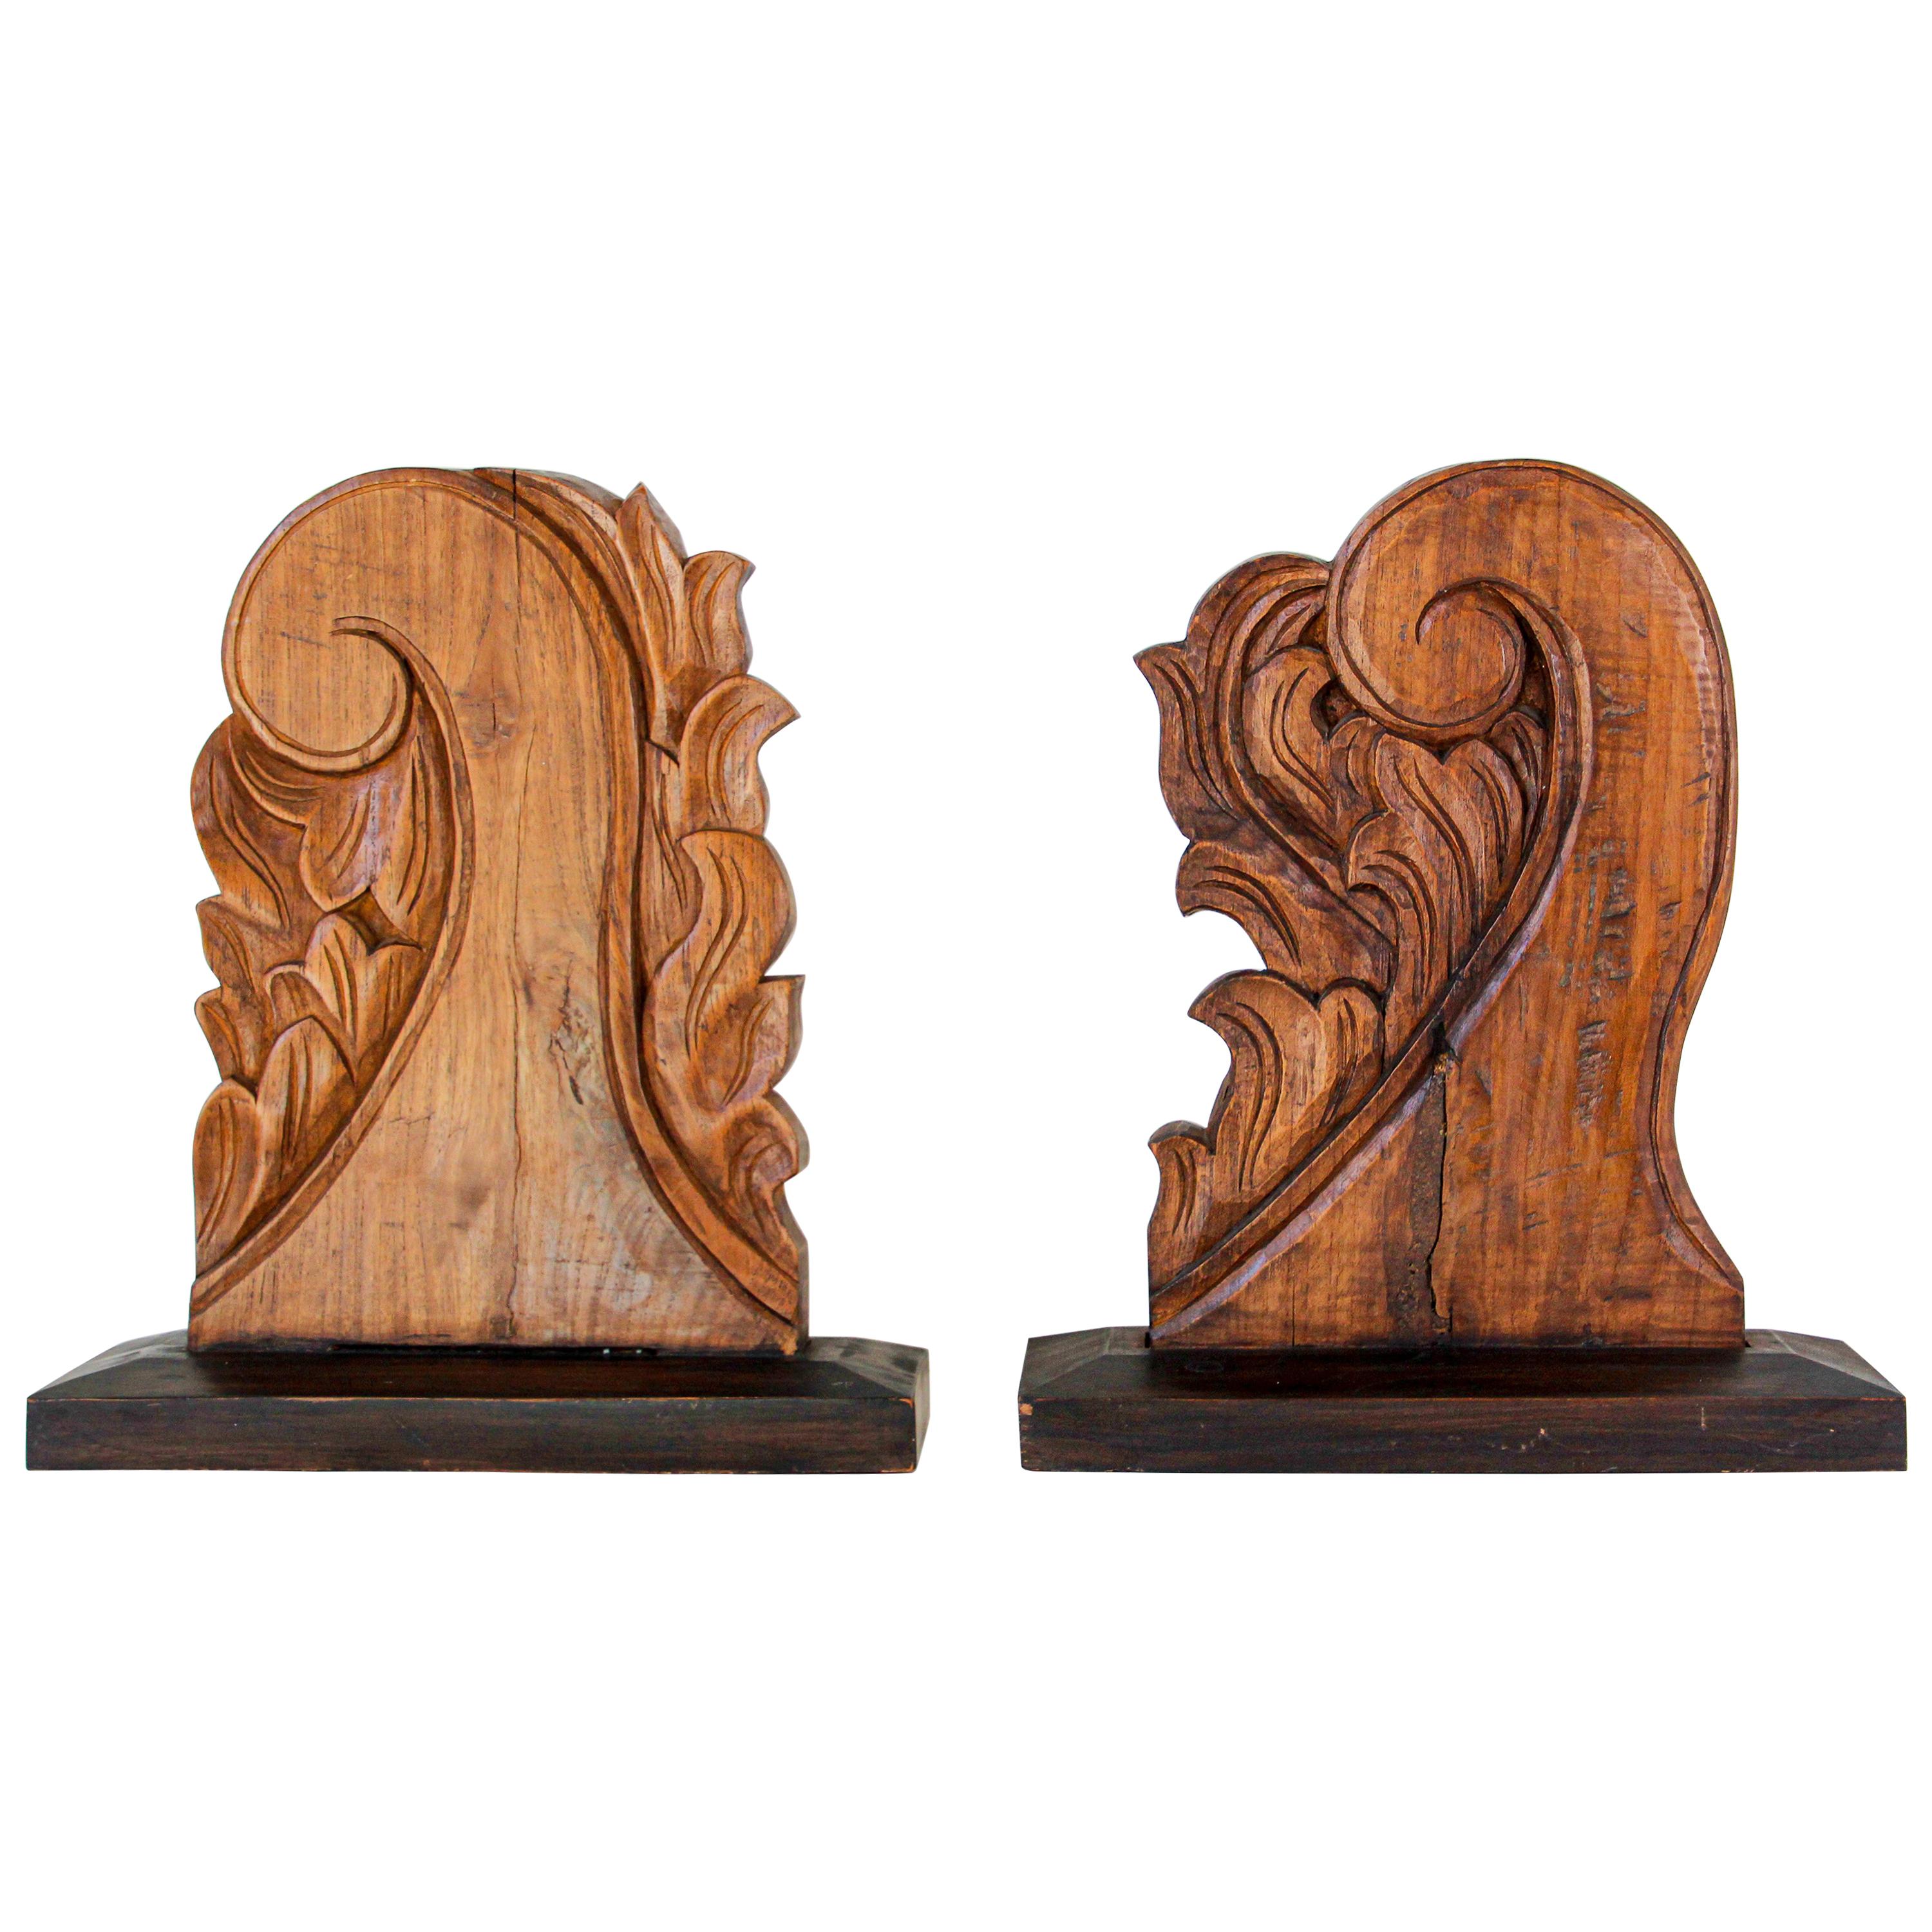 Architectural European Mounted Carved Wood Fragment, Pair